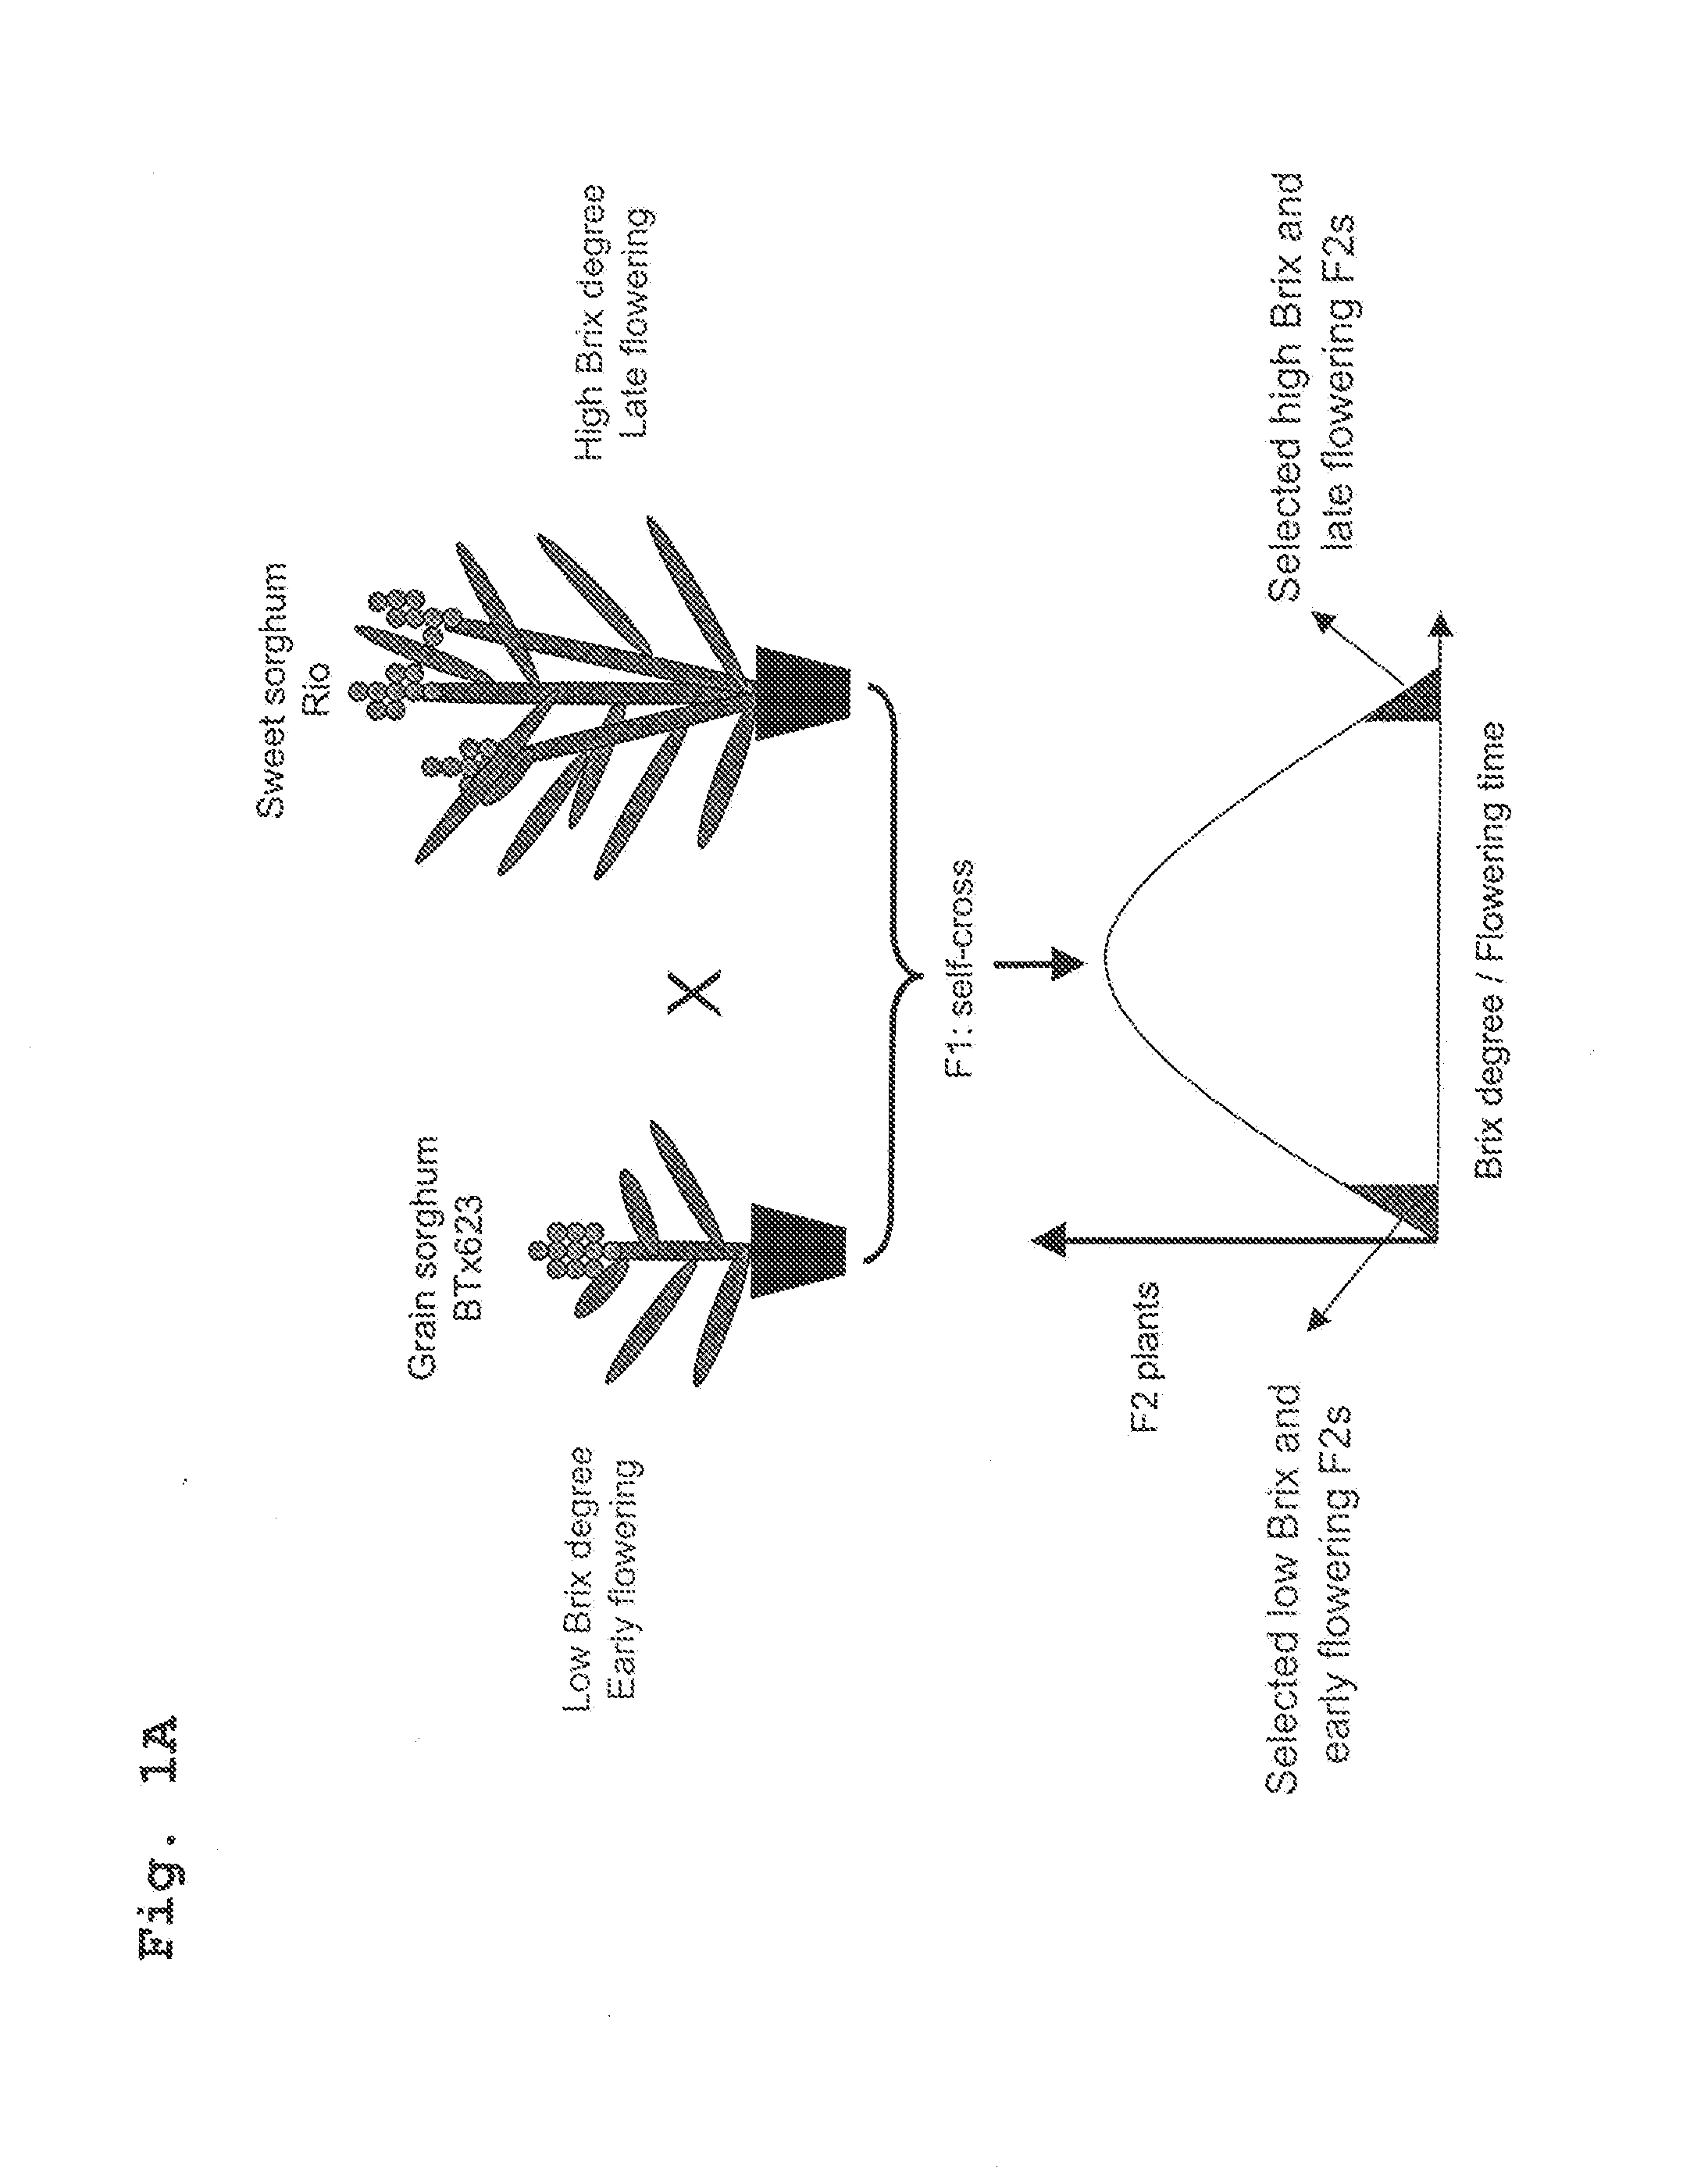 Compositions and Methods for the Regulation of Carbohydrate Metabolism and Flowering in Plants